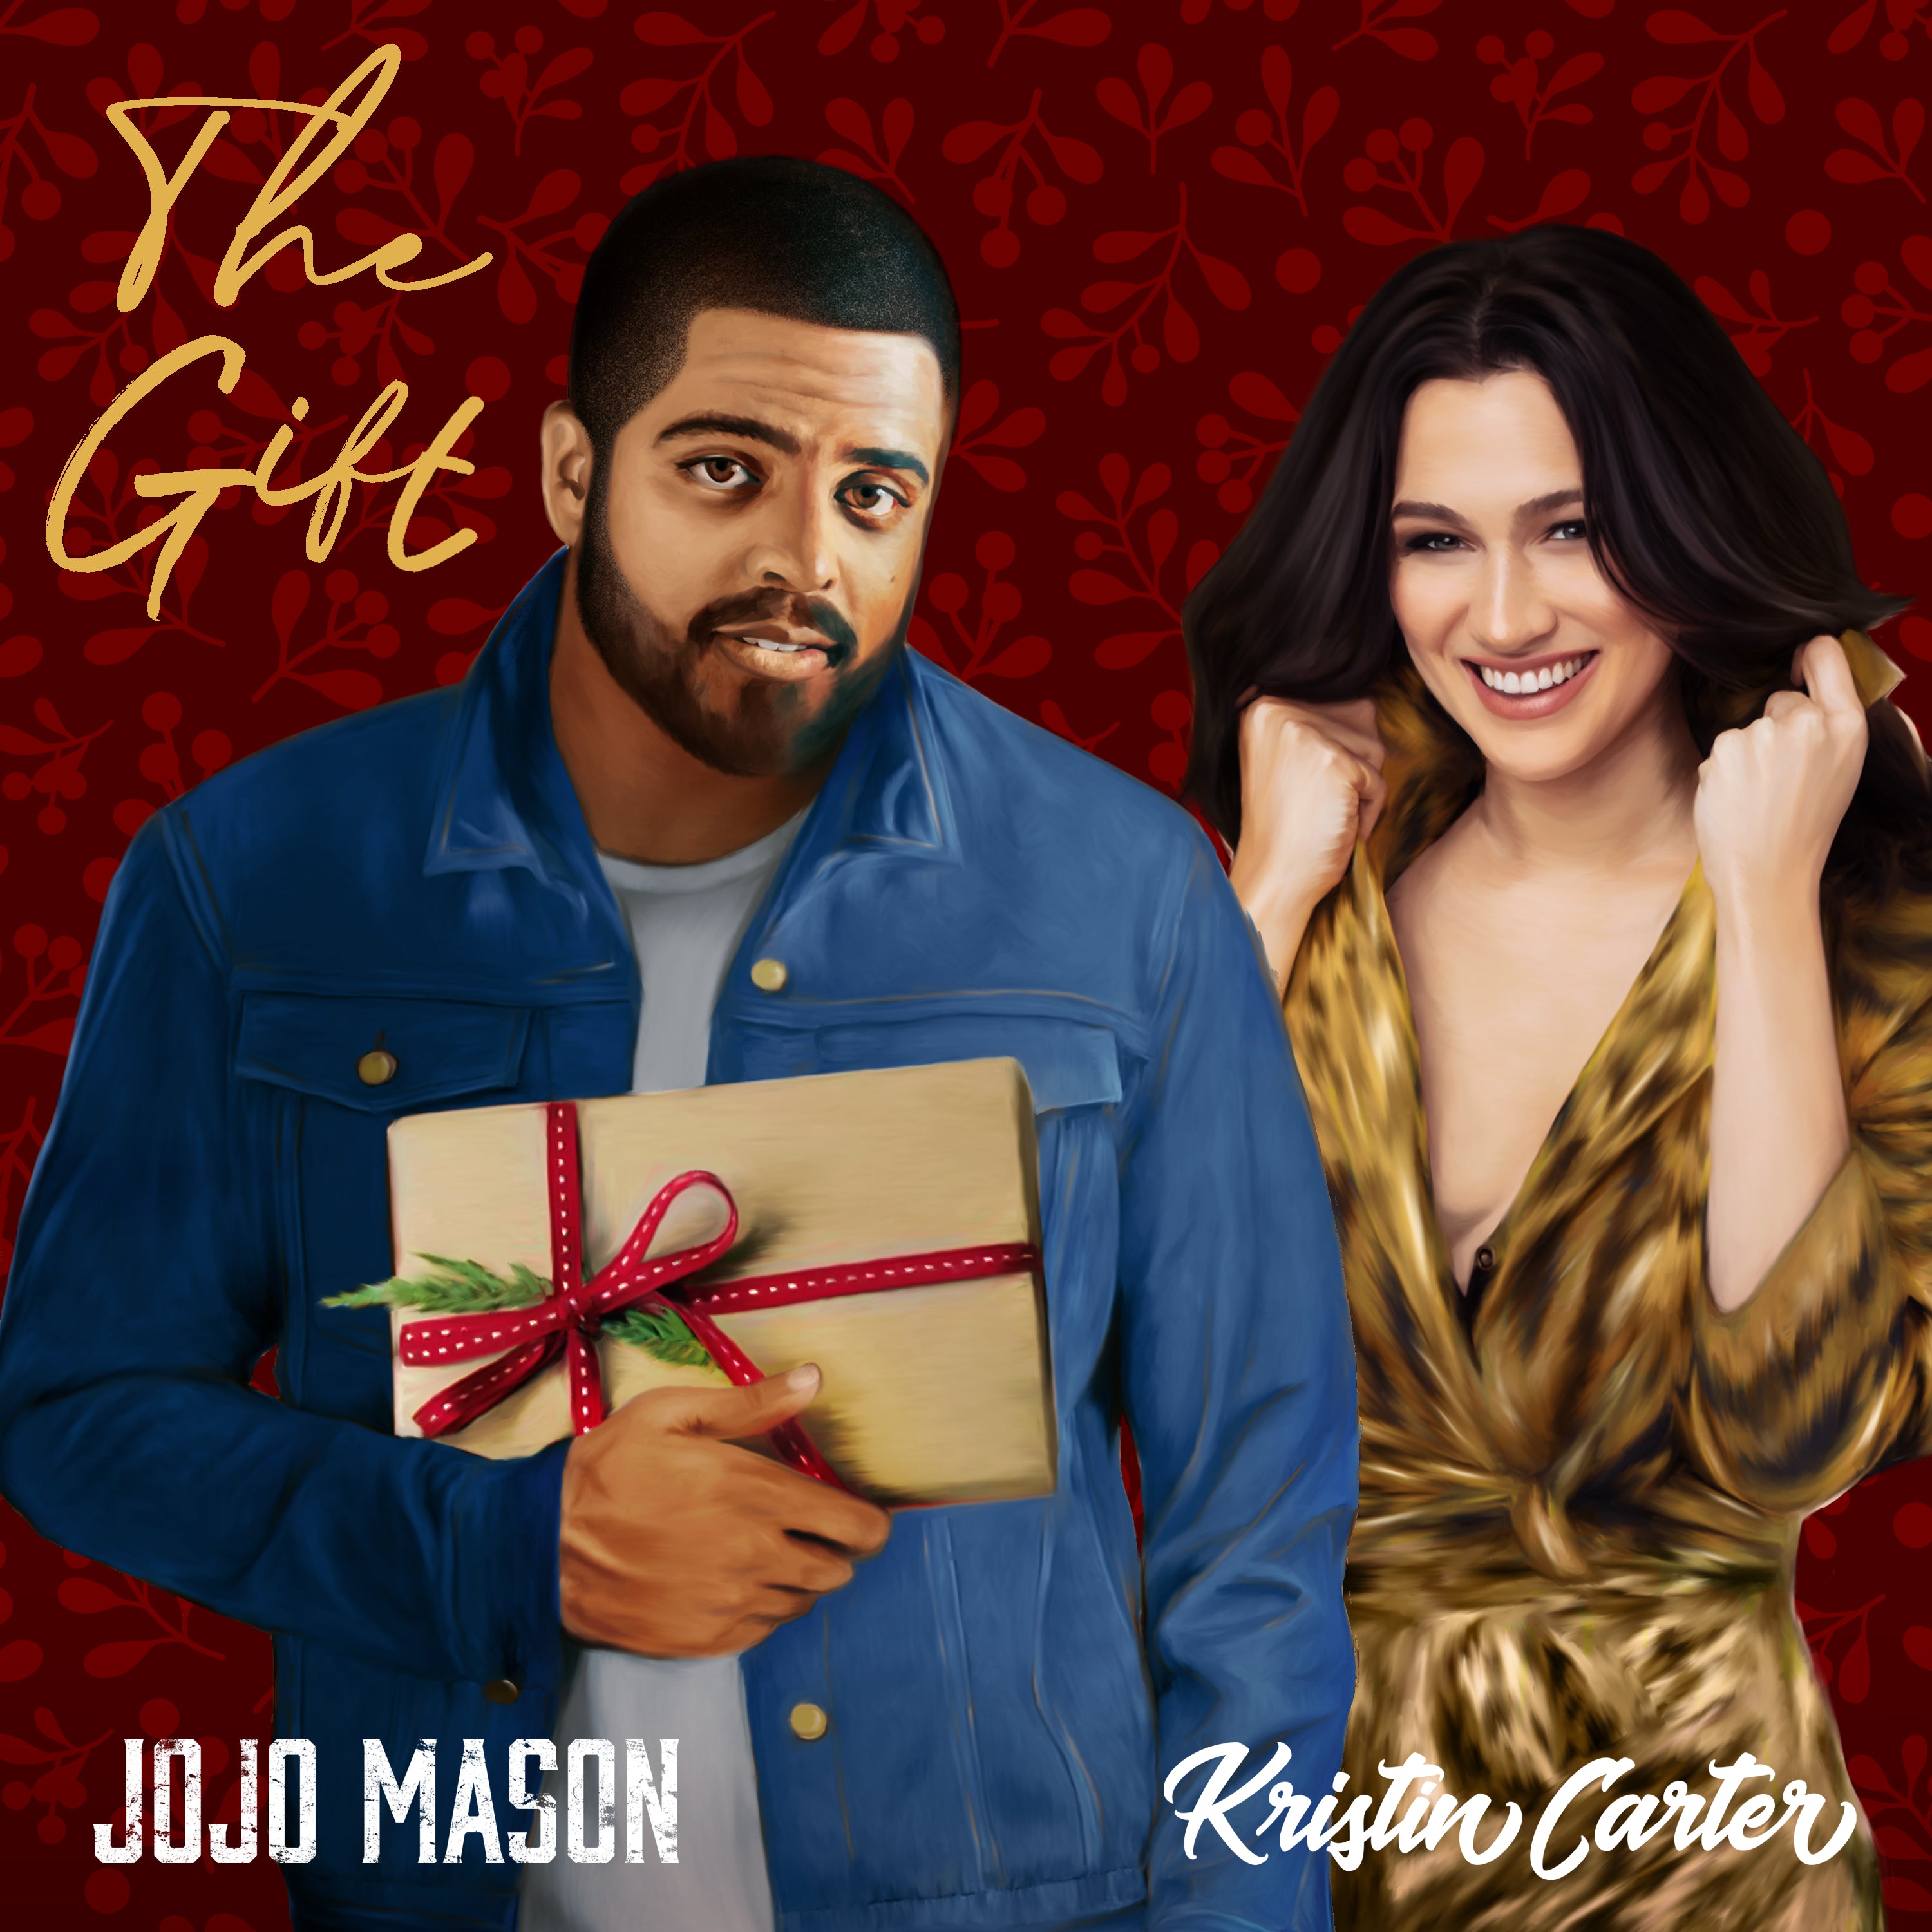 The Gift